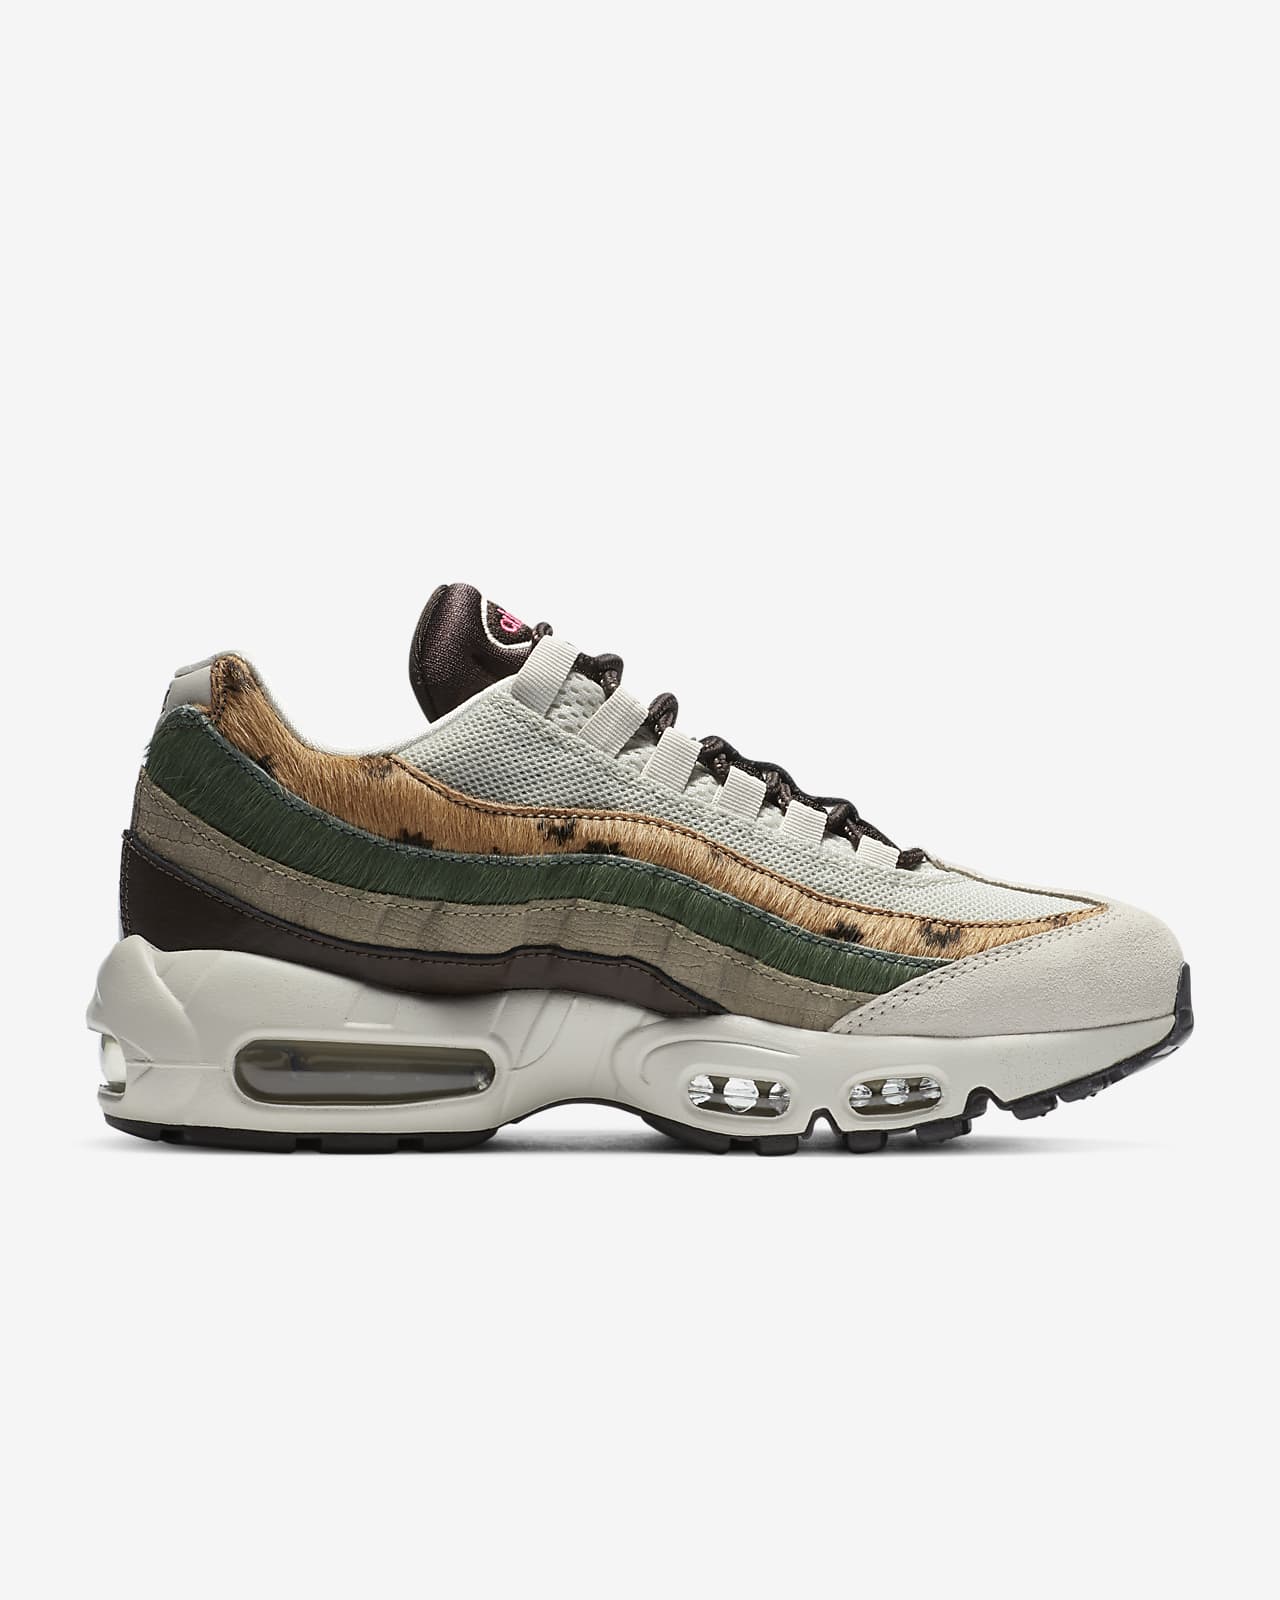 nike air max 95 for running